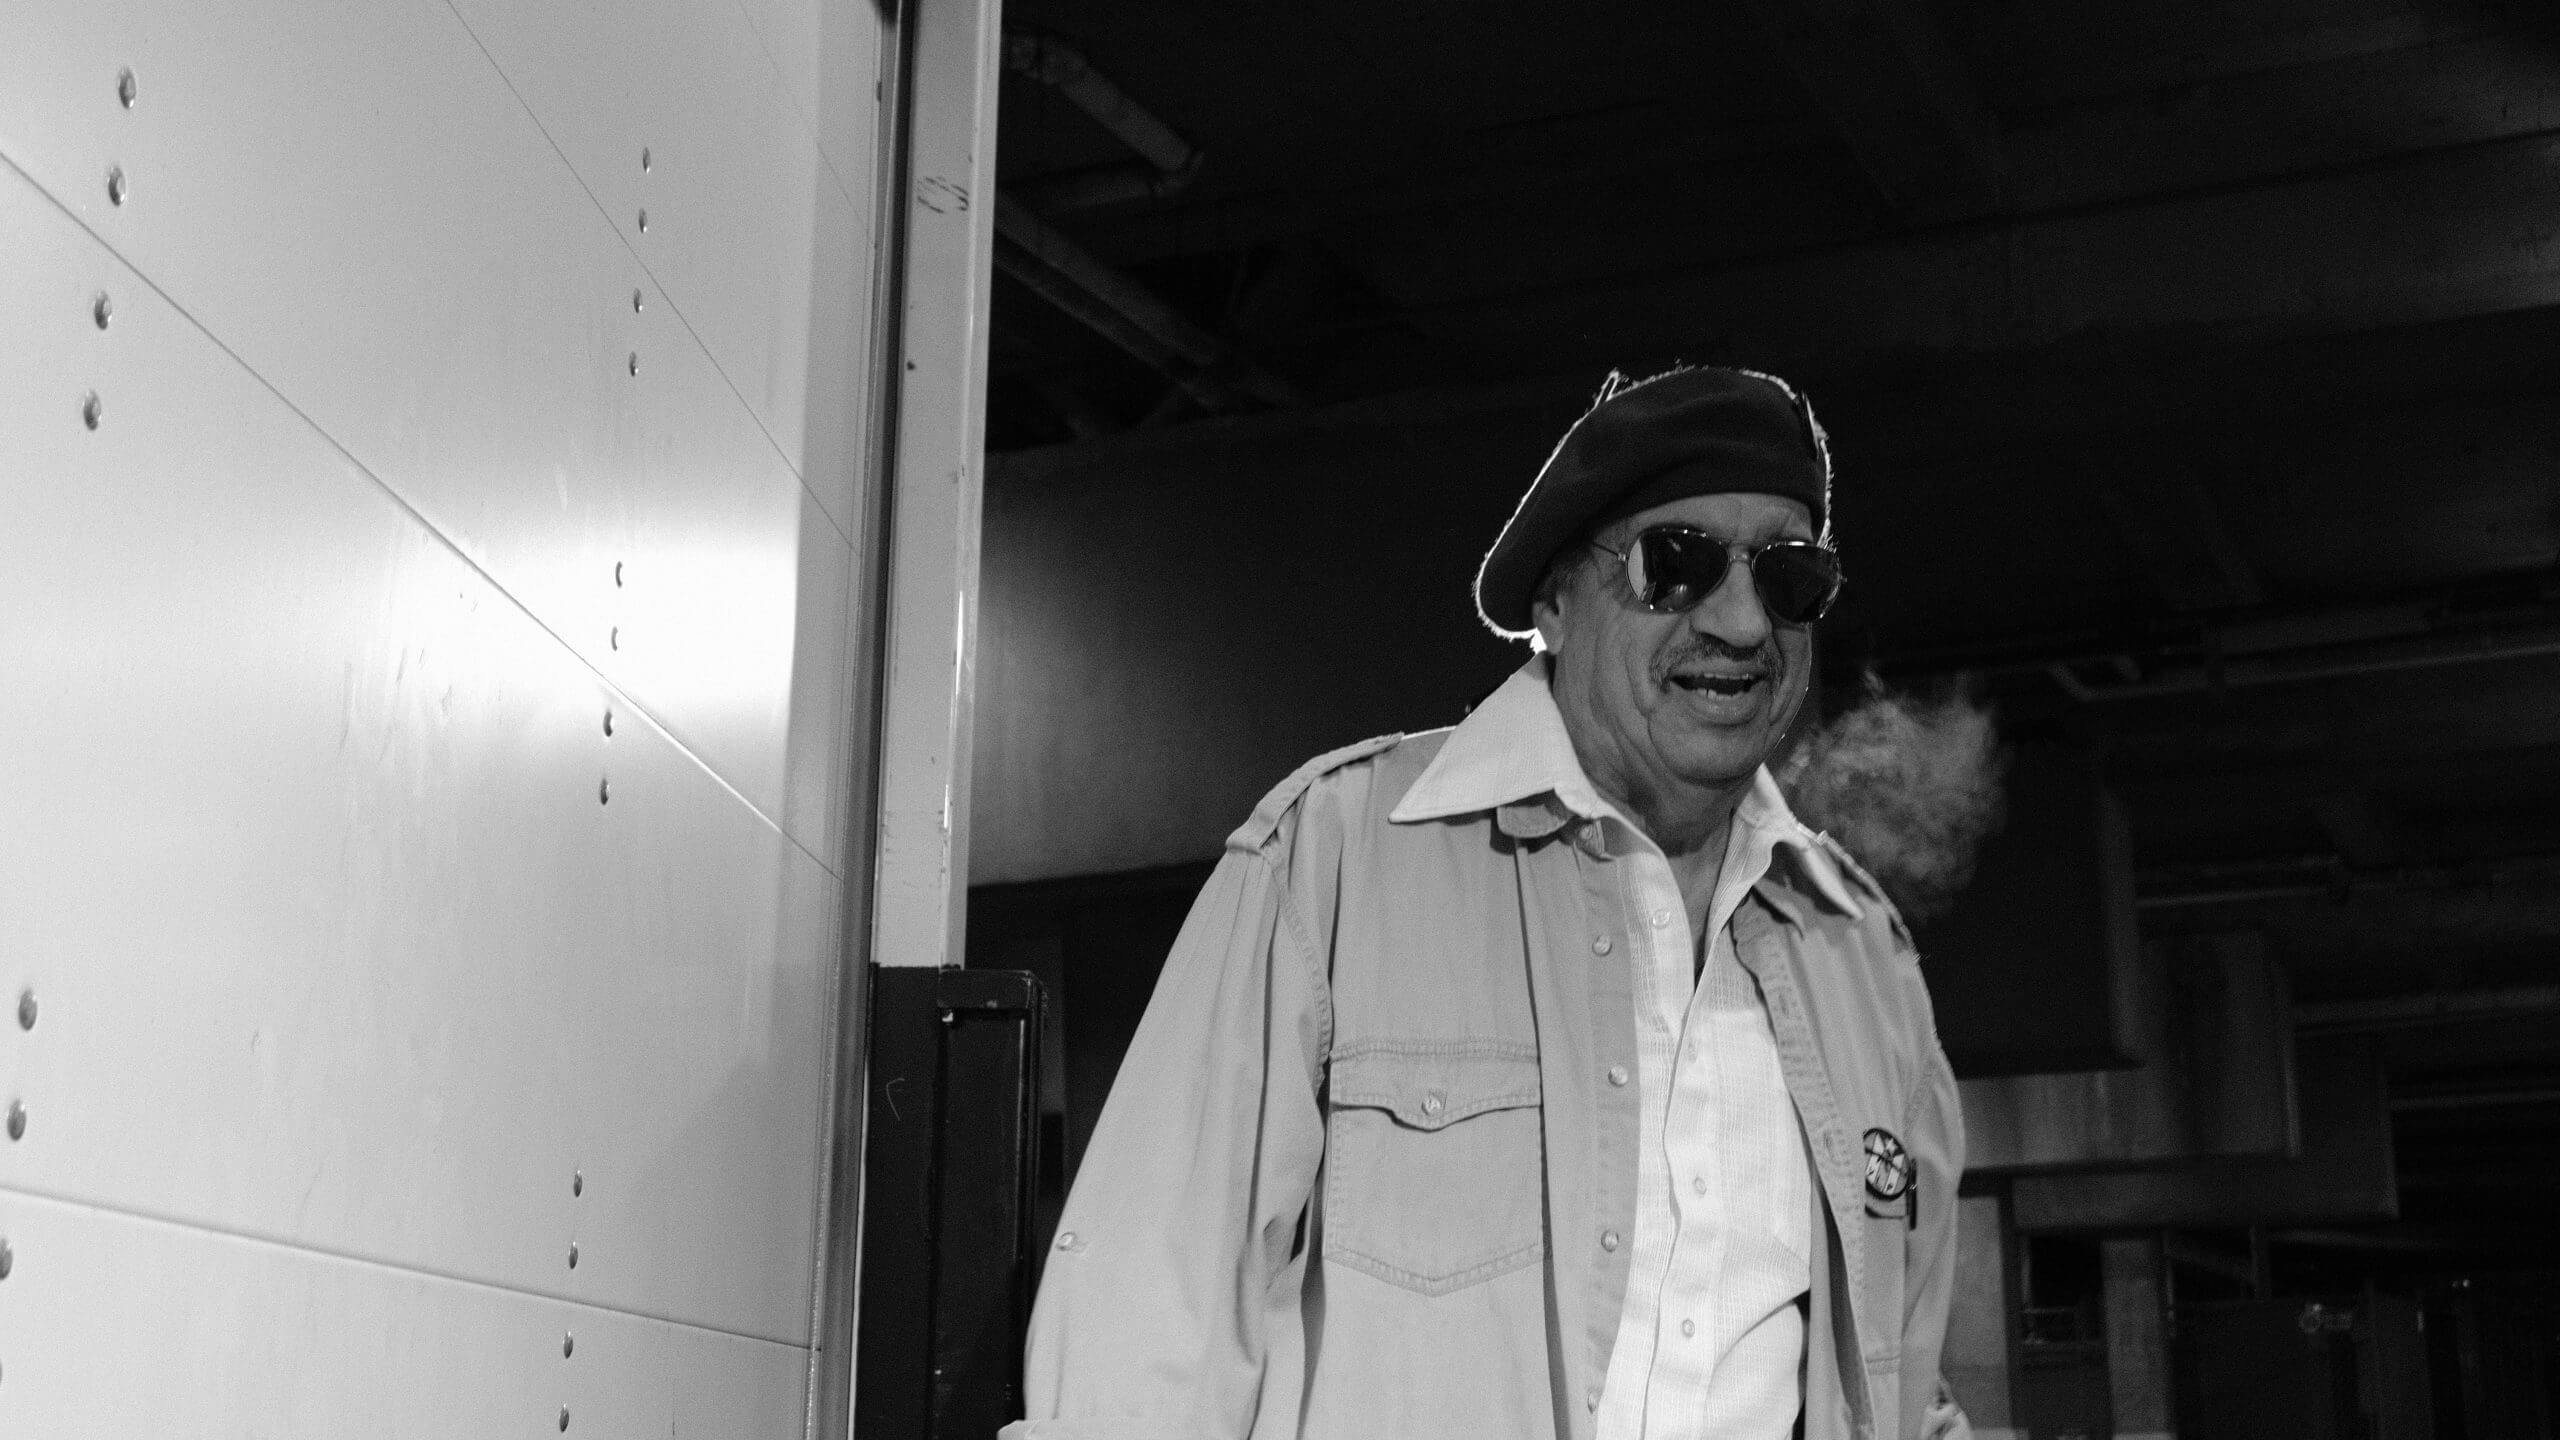 Low angle shot of an actor, wearing a shirt, a jacket, a beret, and dark glasses